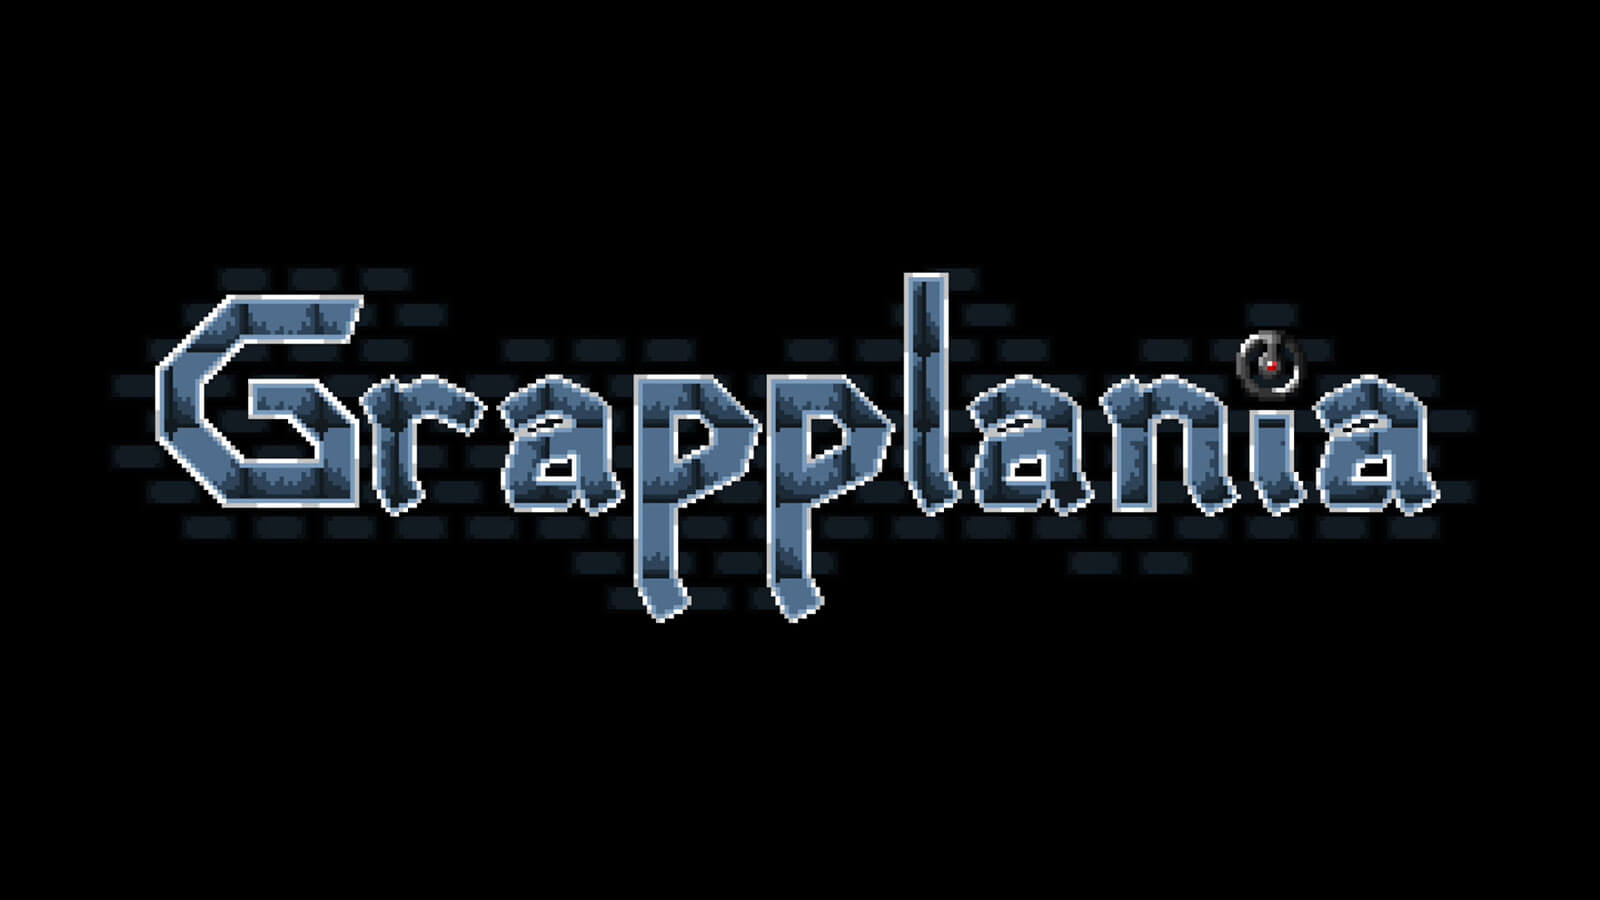 A title screen with the name of the game, Grapplania, in front of a black background.